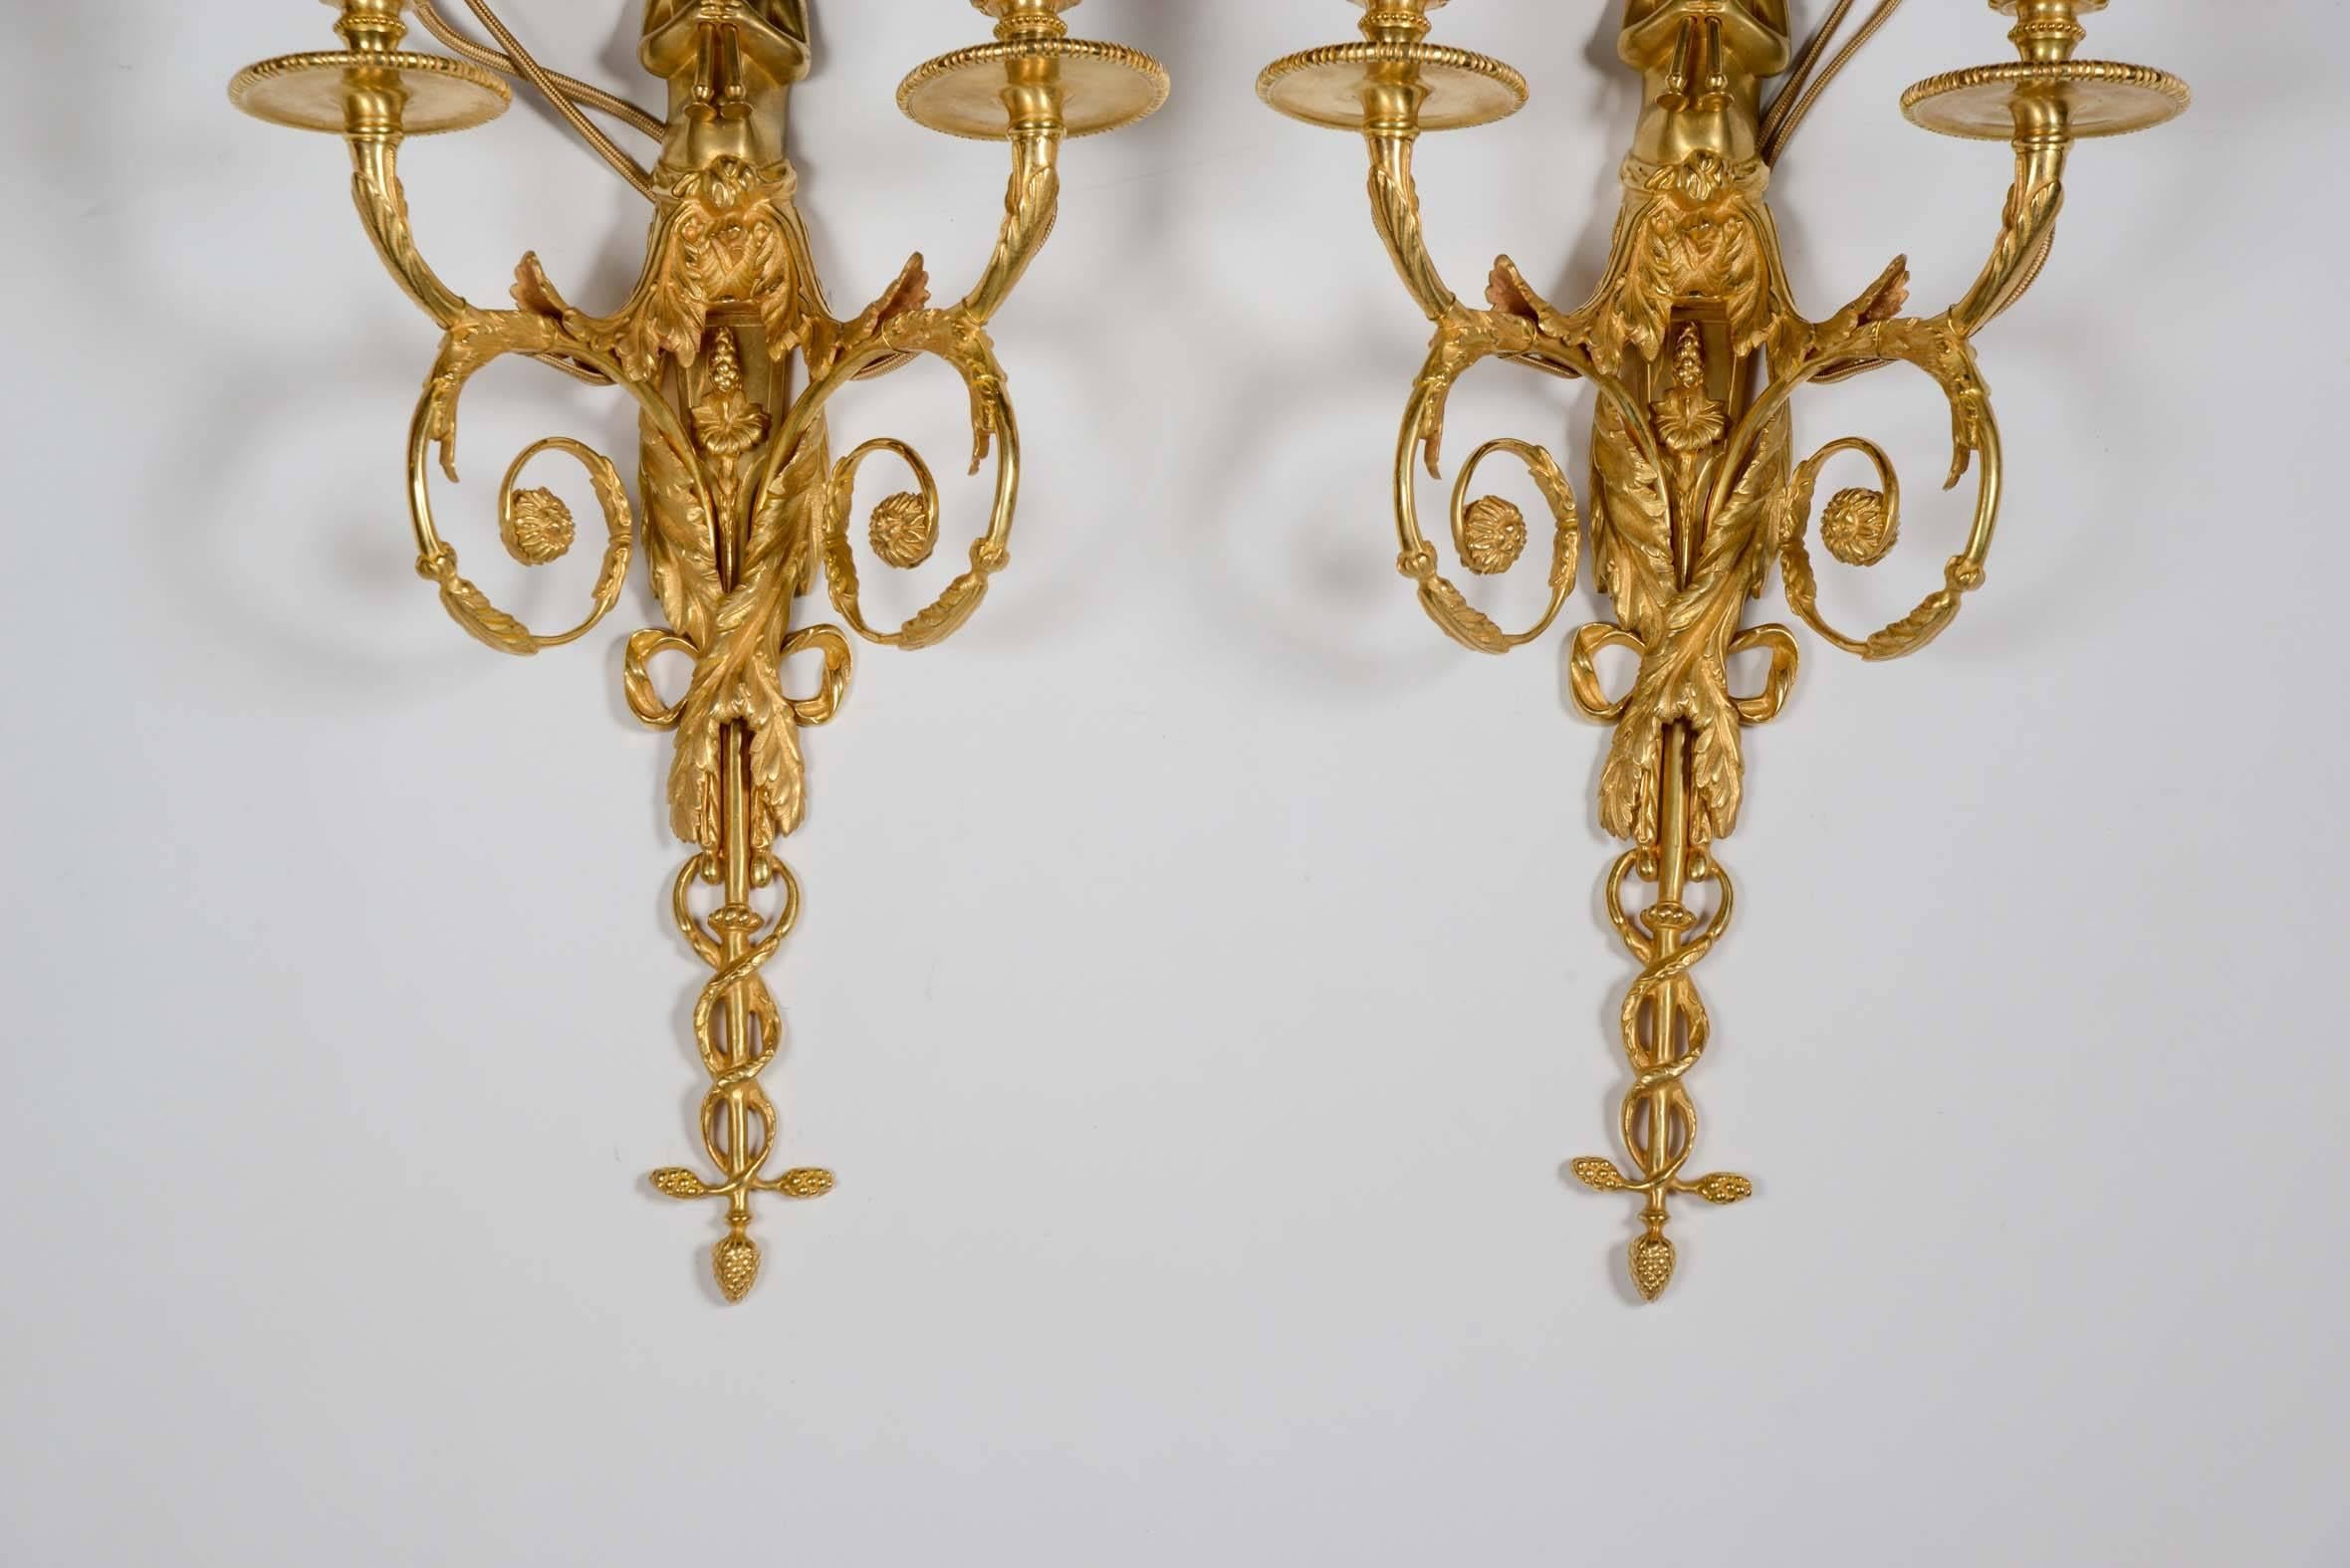 Pair of Louis XVI style wall sconces.
Gilded bronze.
Representing 